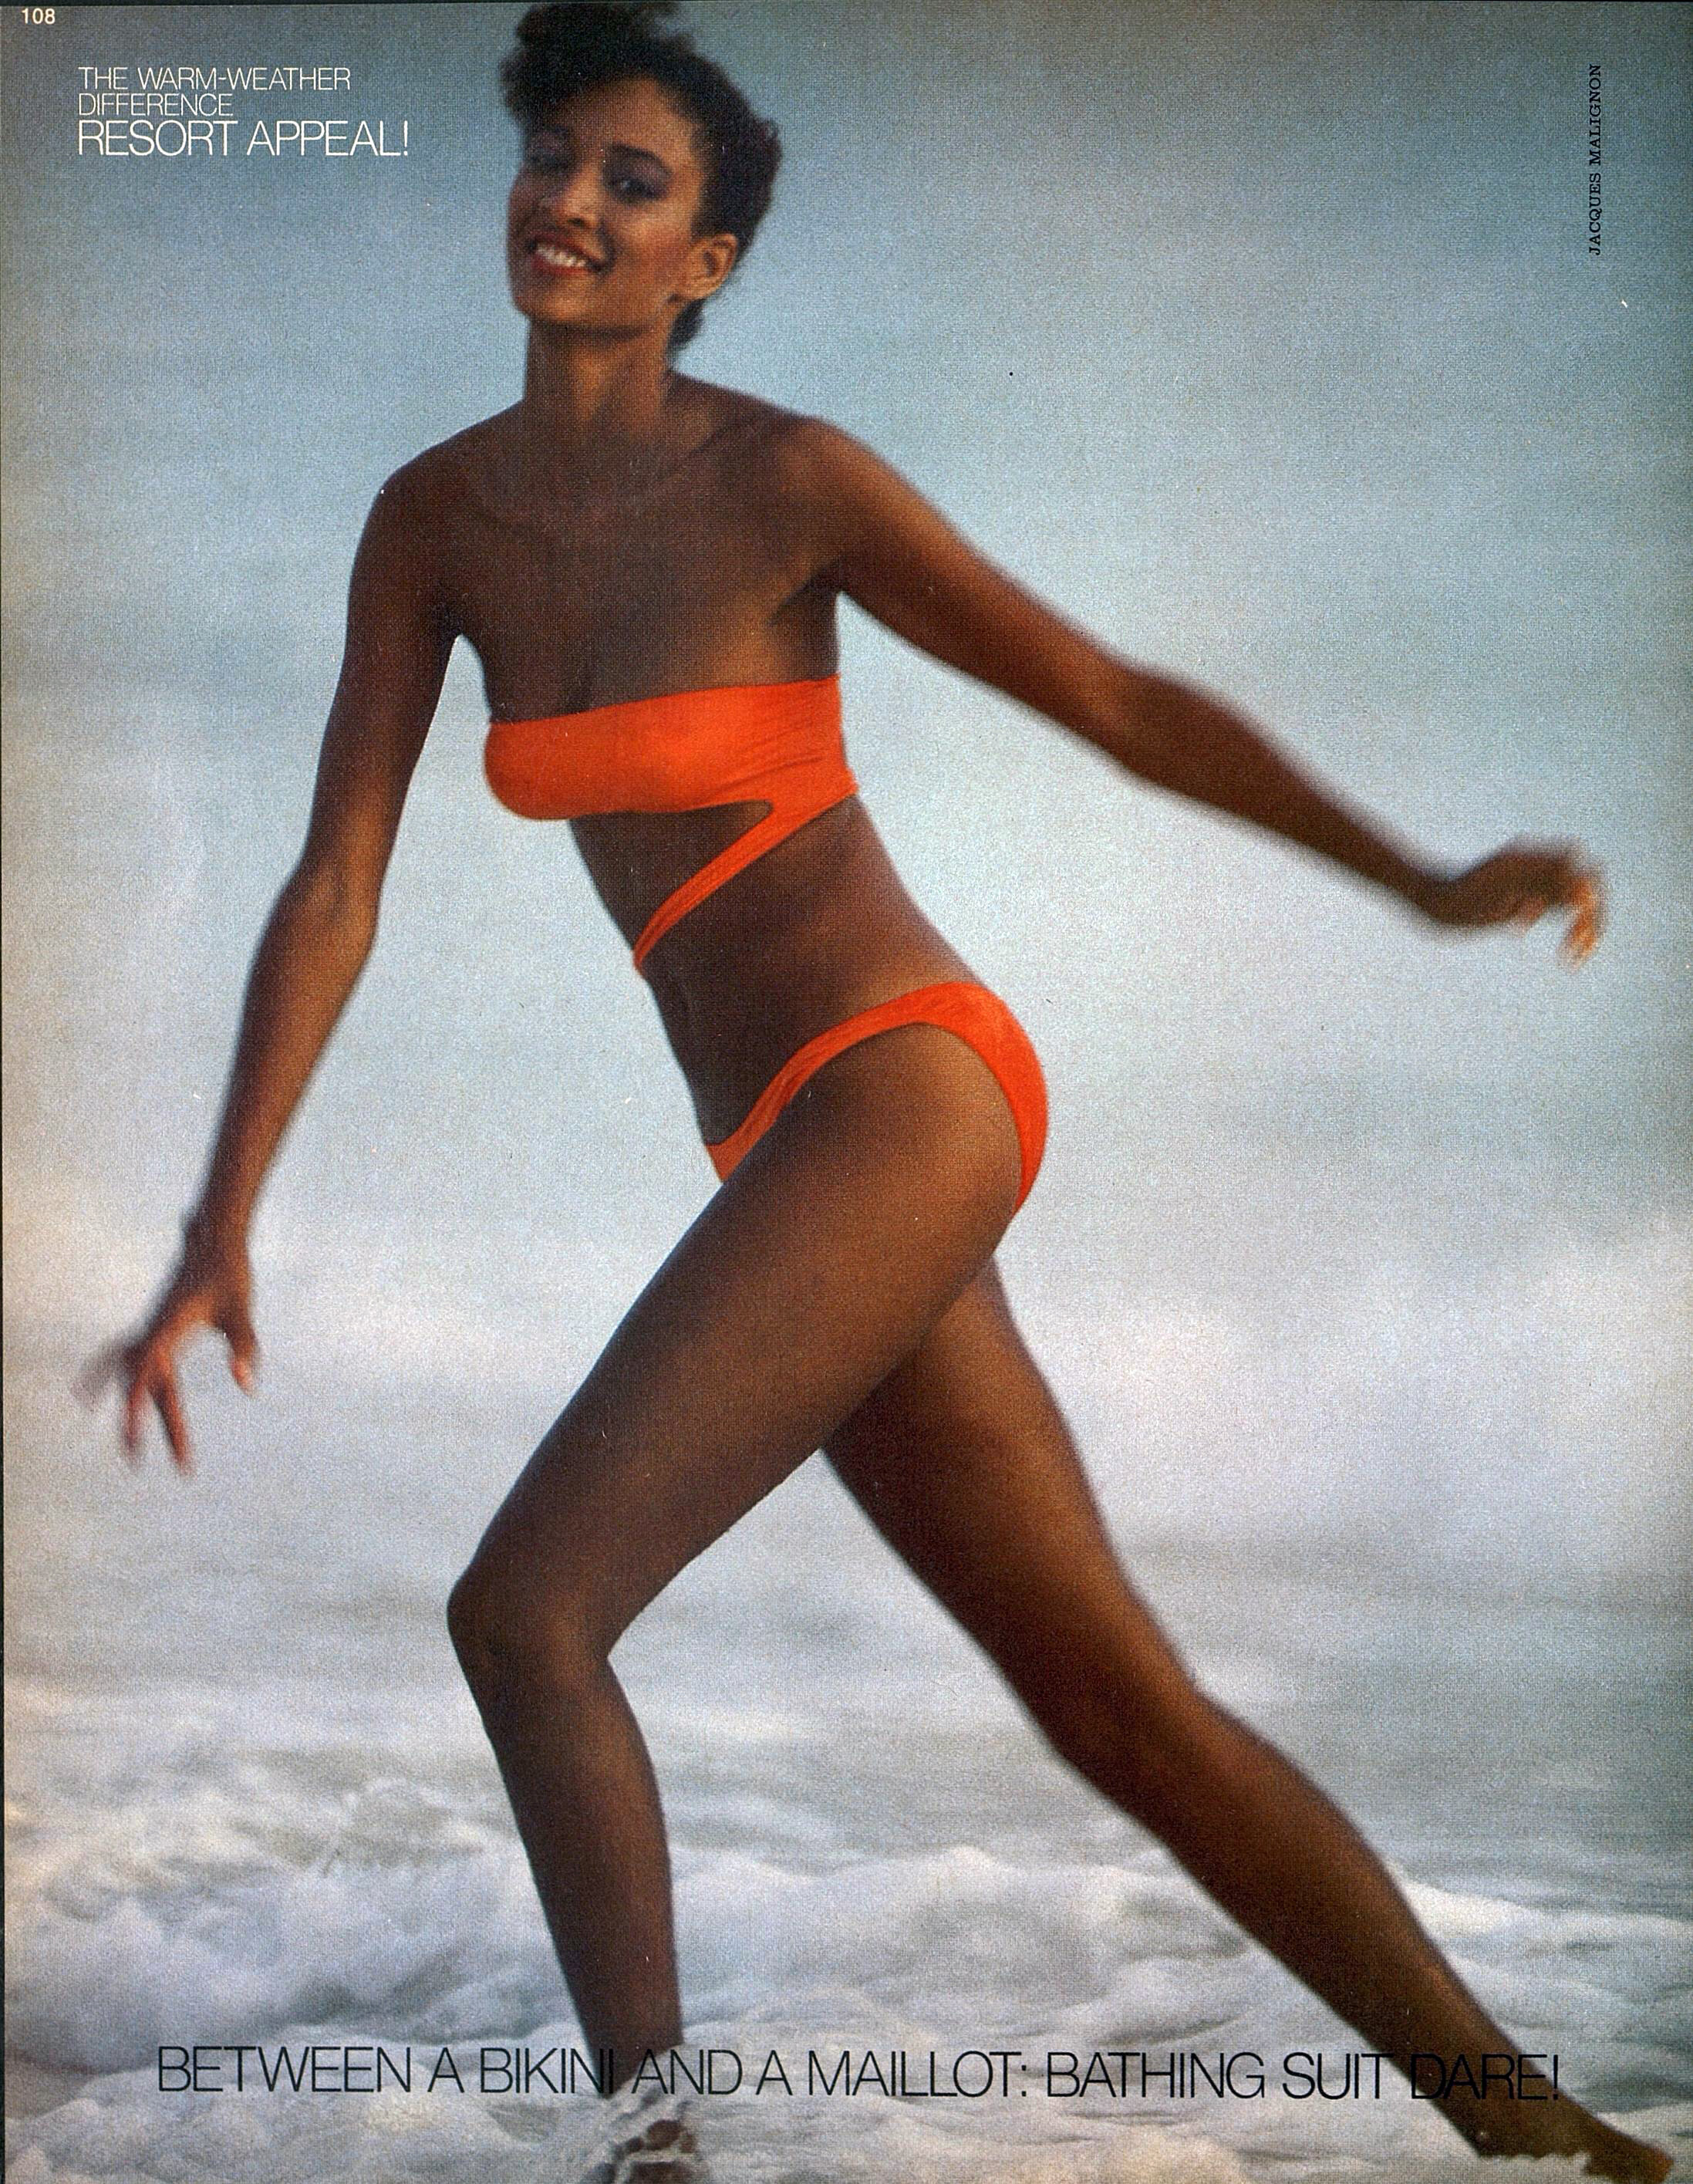 Peggy Dillard in a barely there OMO suit. Photo by Jacques Malignon for Harper's Bazaar, January 1980.